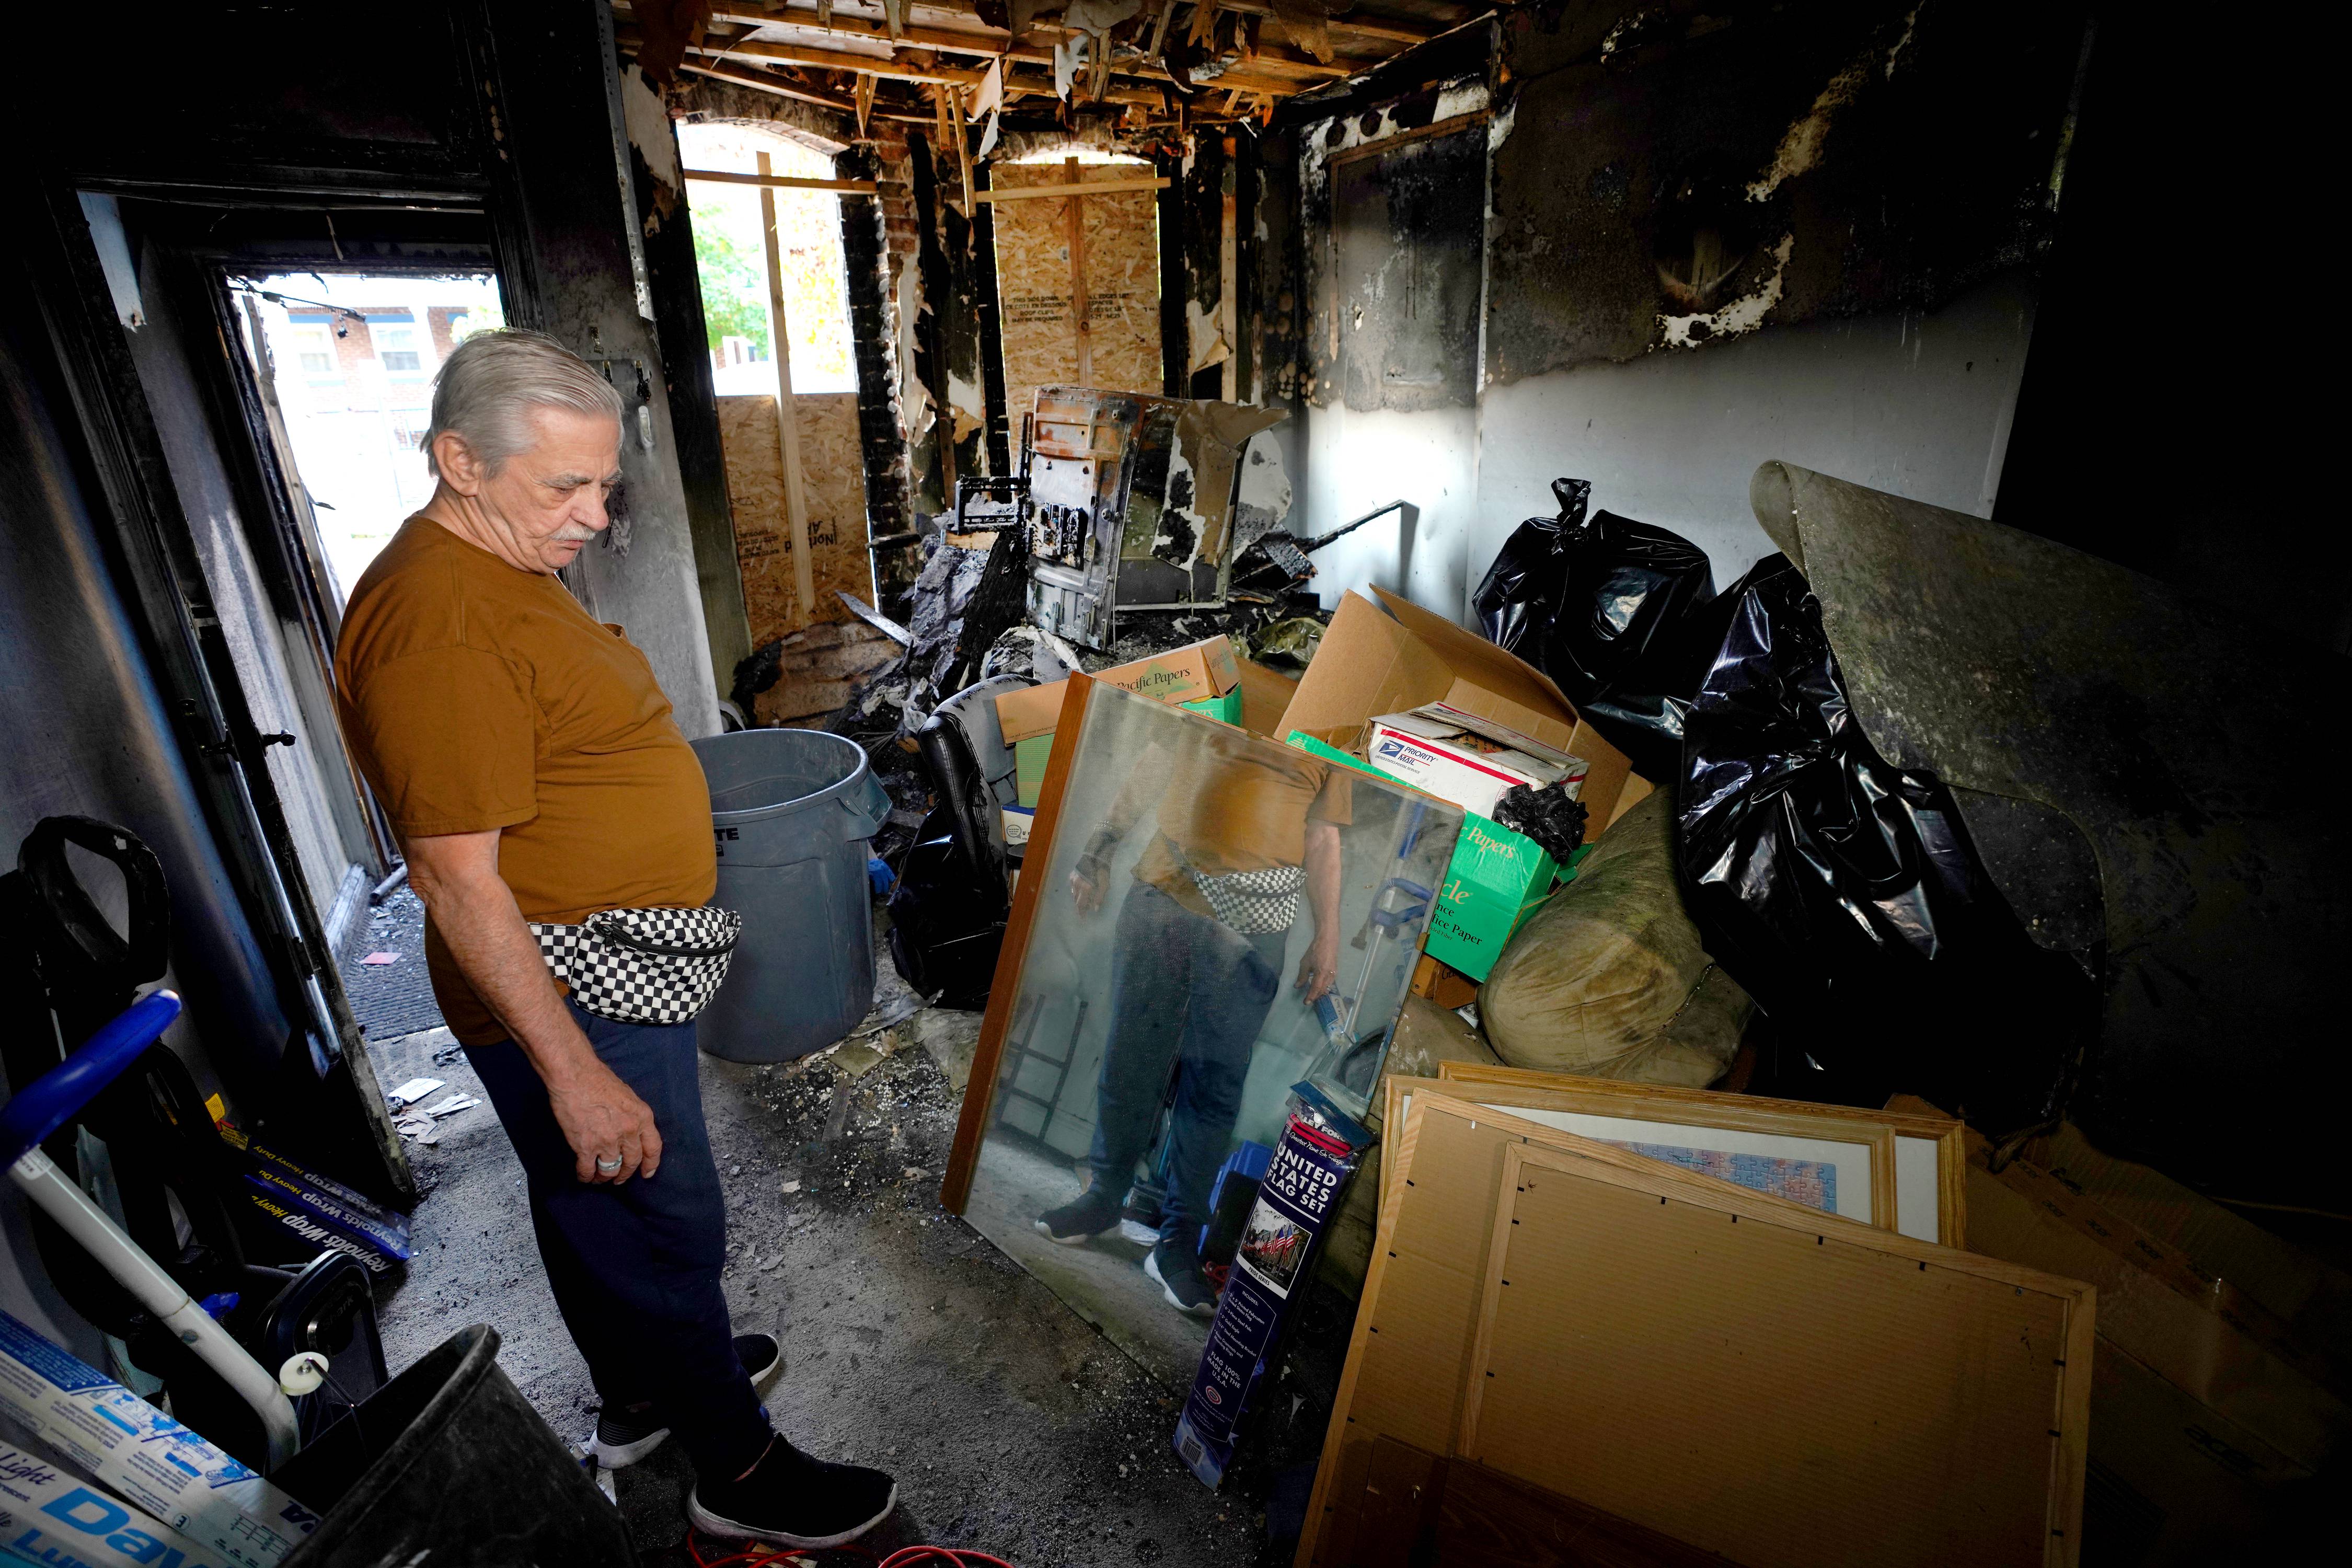 John Washko, one of the victims of the fire, is photographed in the burned out home and looks for salvageable items from the fire.